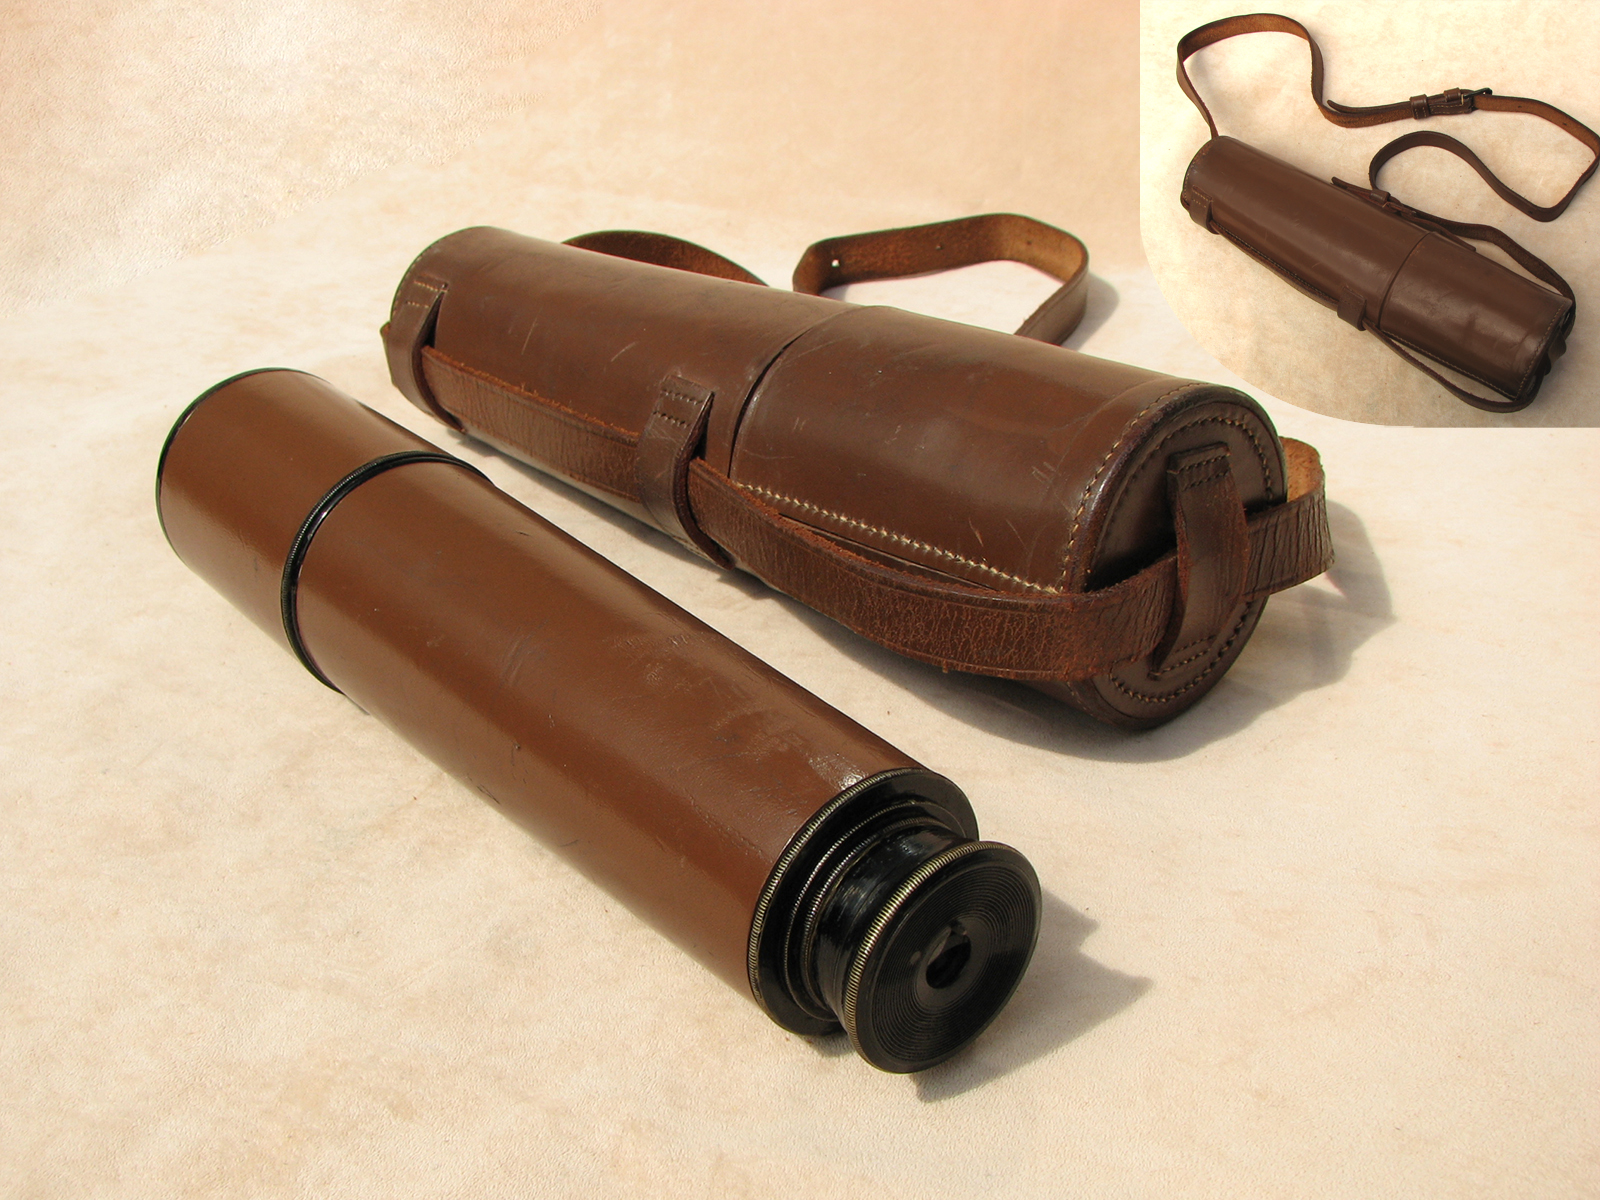 WW2 Scout Regiment field telescope by H C Ryland and Son